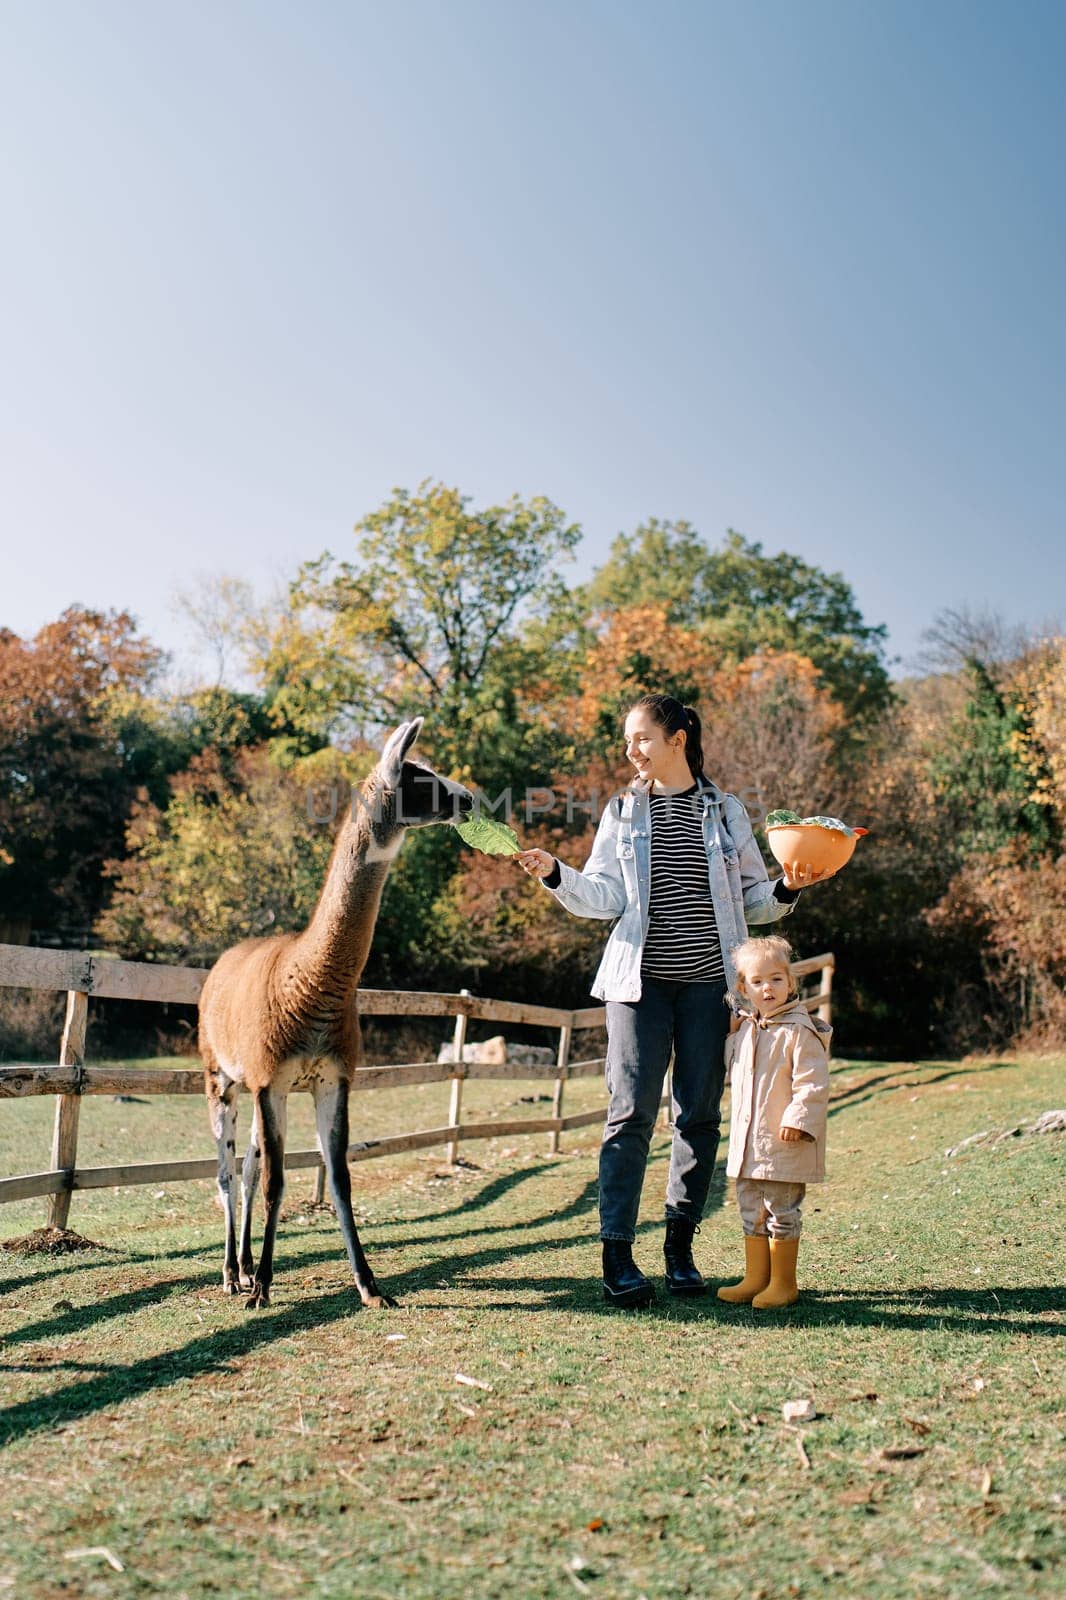 Little girl stands near her mother feeding a brown llama a cabbage leaf. High quality photo